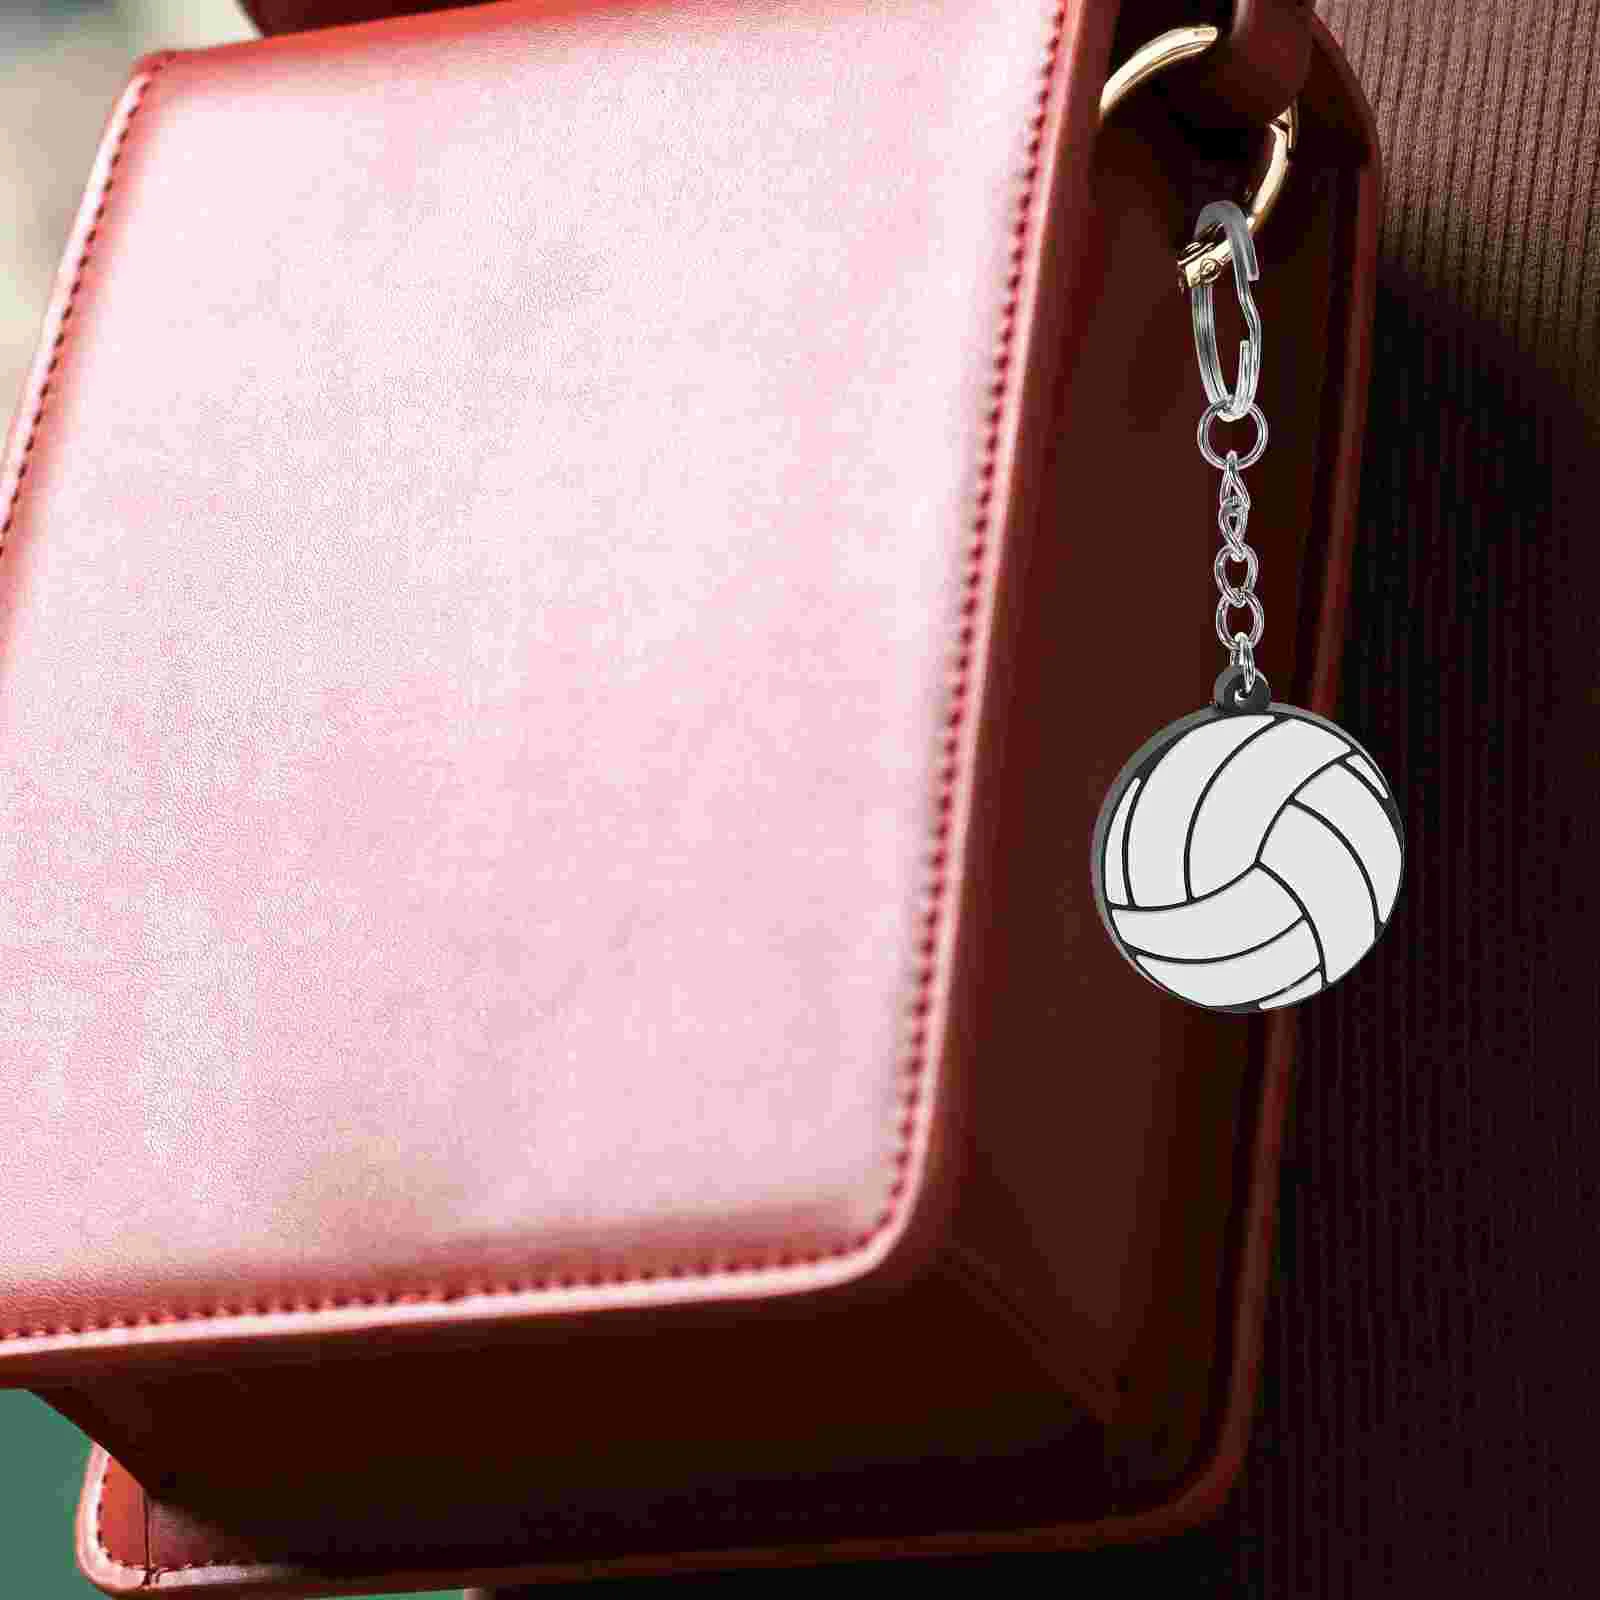 Gift Bag Volleyball Party Bag Hanging Pendants Basketball Accessoriess Volleyball Party Favors